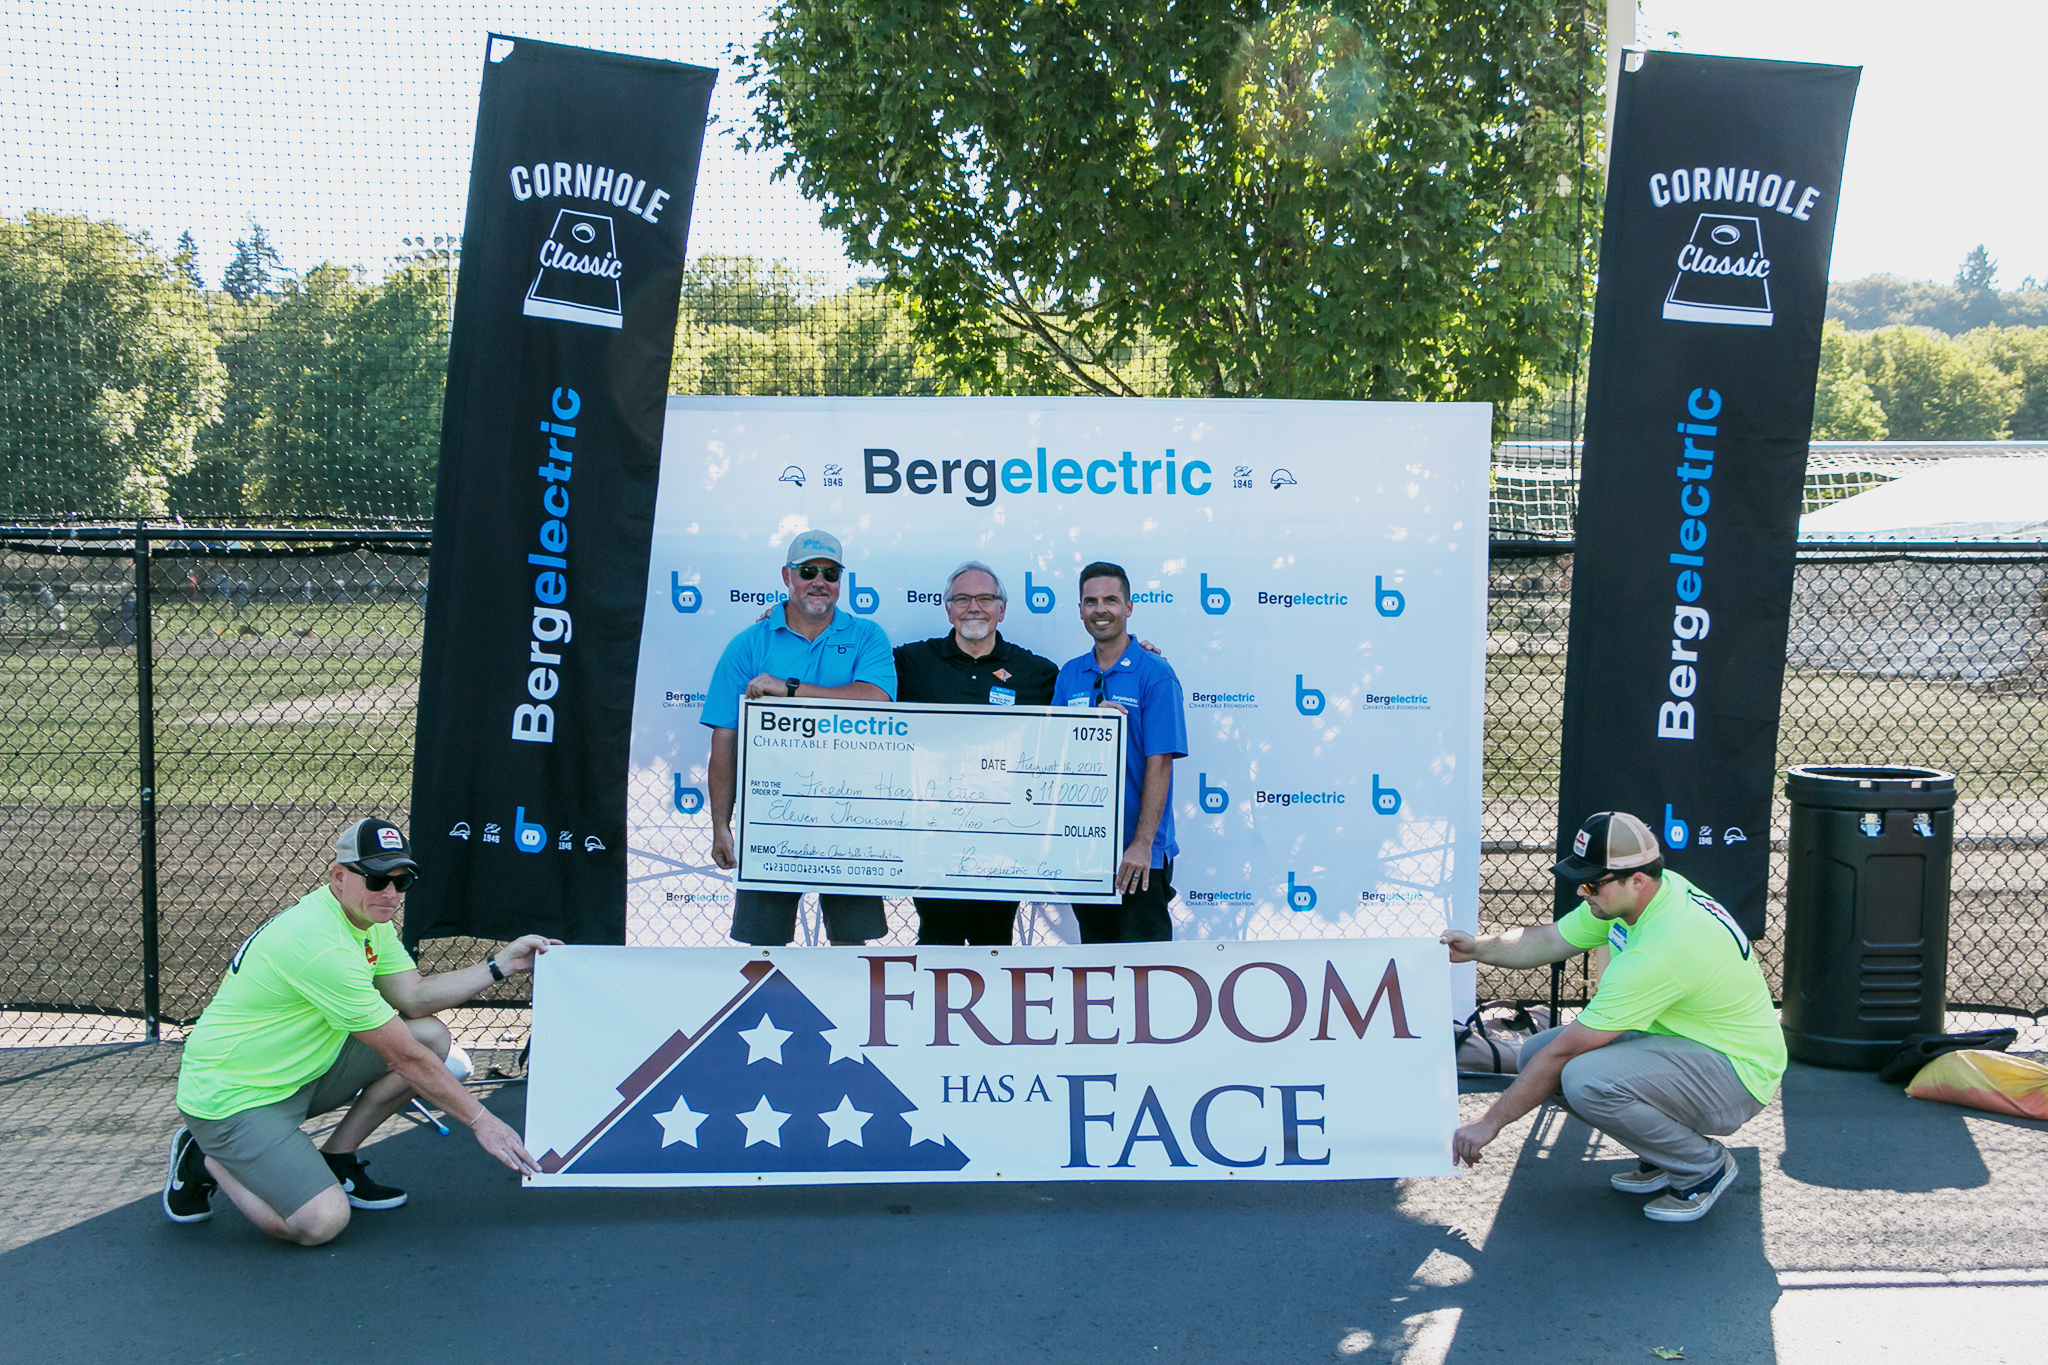 Seattle’s First Cornhole Classic | Bergelectric Charitable Foundation